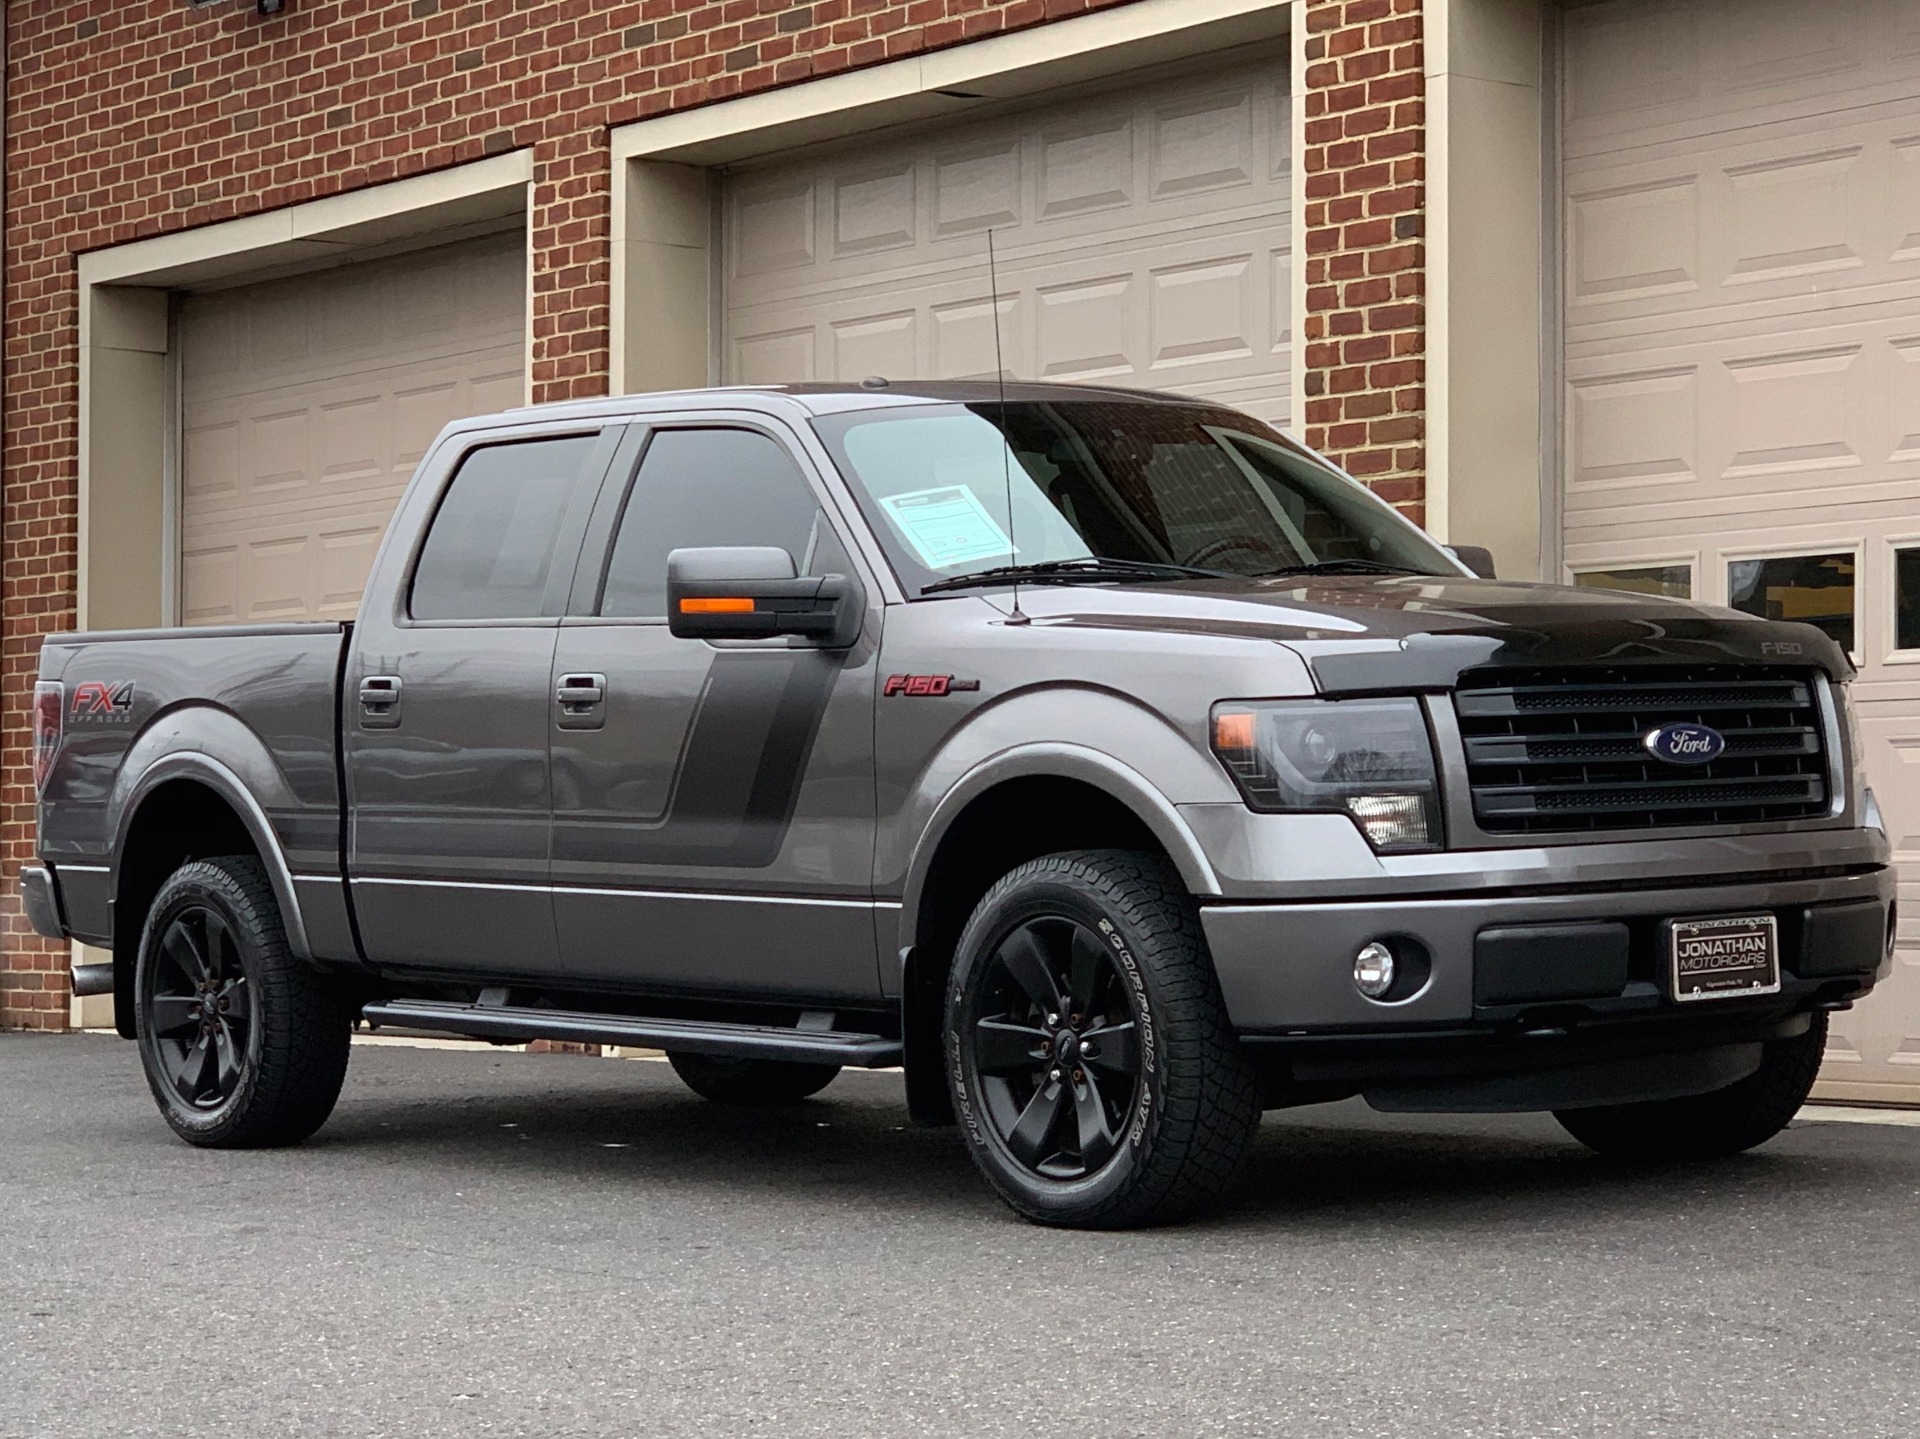 2014 Ford F-150 FX4 Appearance Package Stock # C44611 for sale near